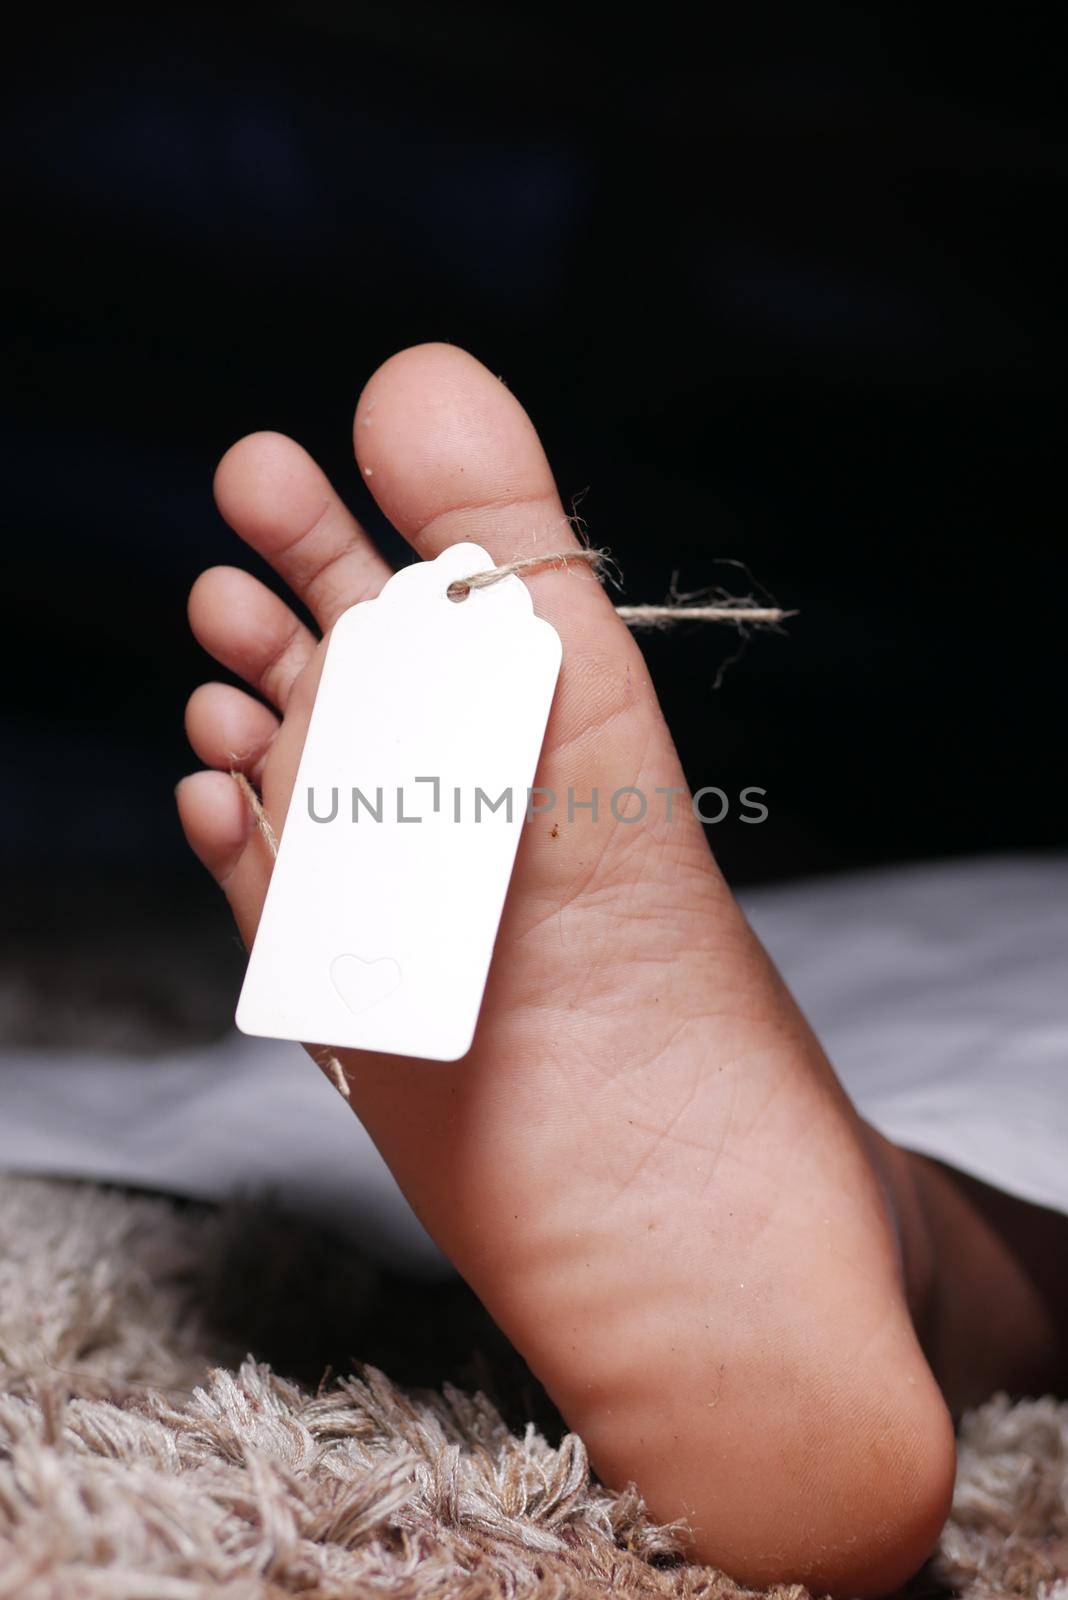 The dead man's body with tag on feet under white cloth in a morgue.